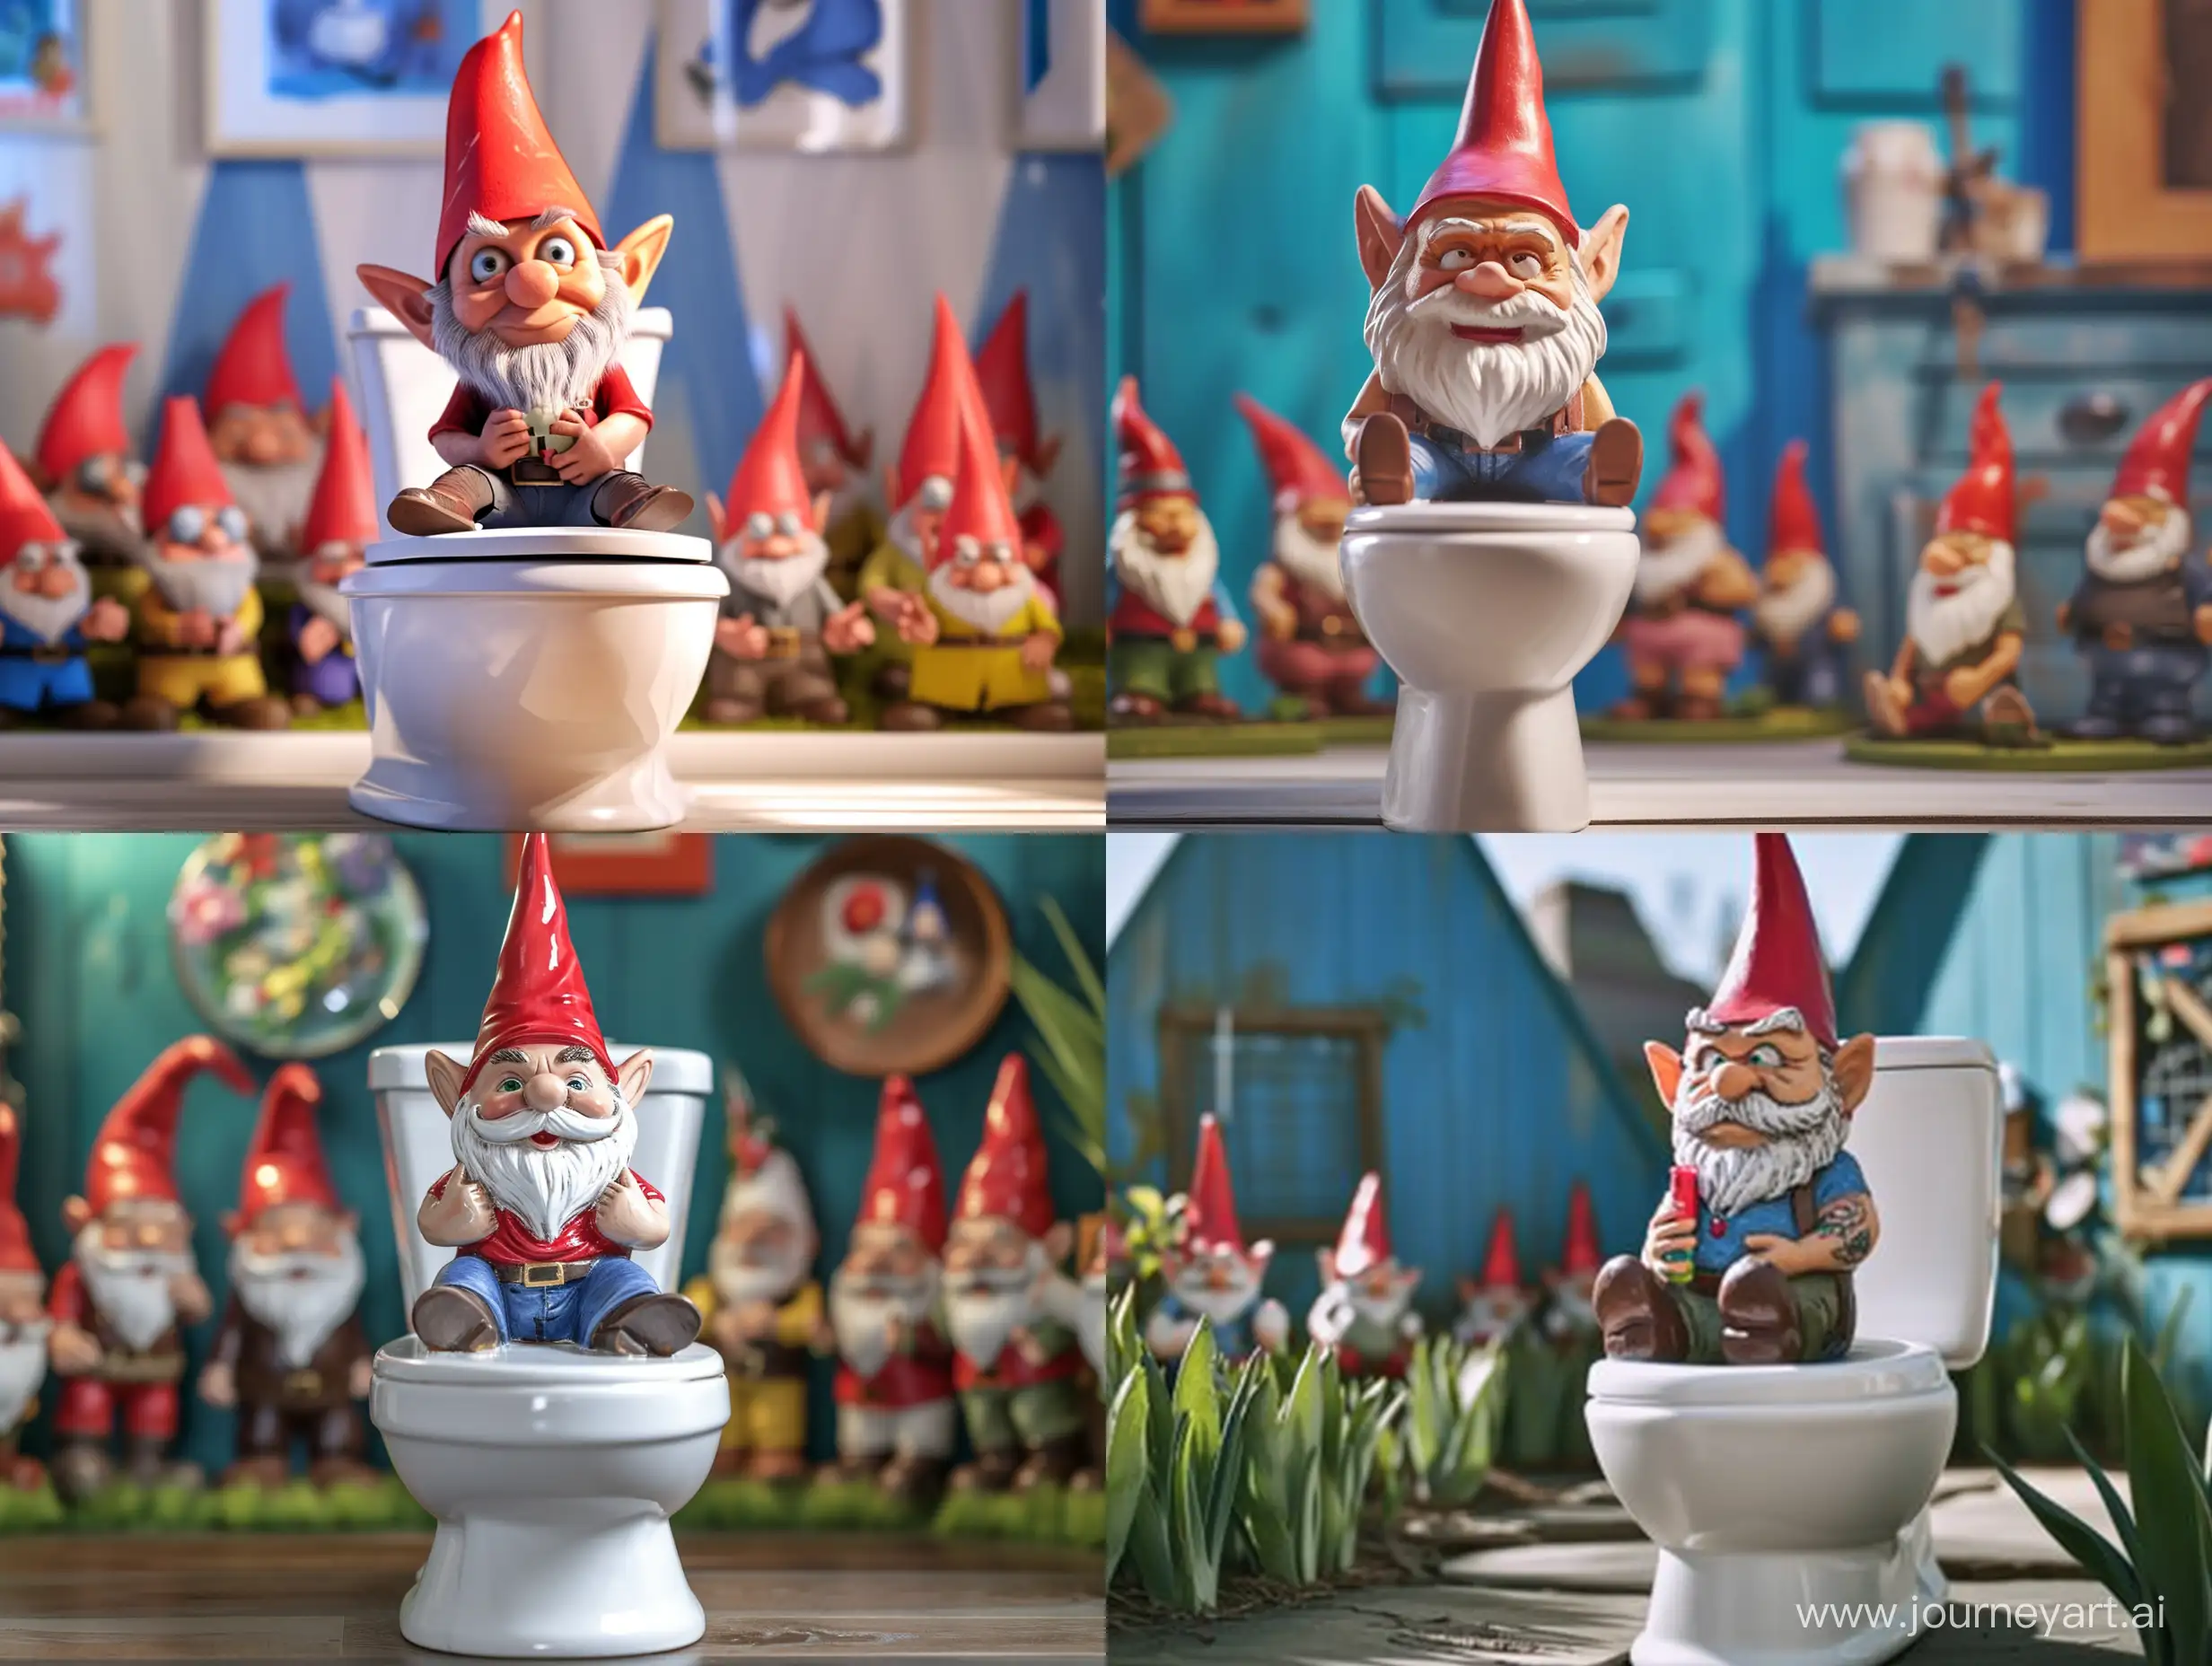 Whimsical-Scene-Mega-Pumped-Gnome-on-Giant-White-Toilet-Surrounded-by-Gnomes